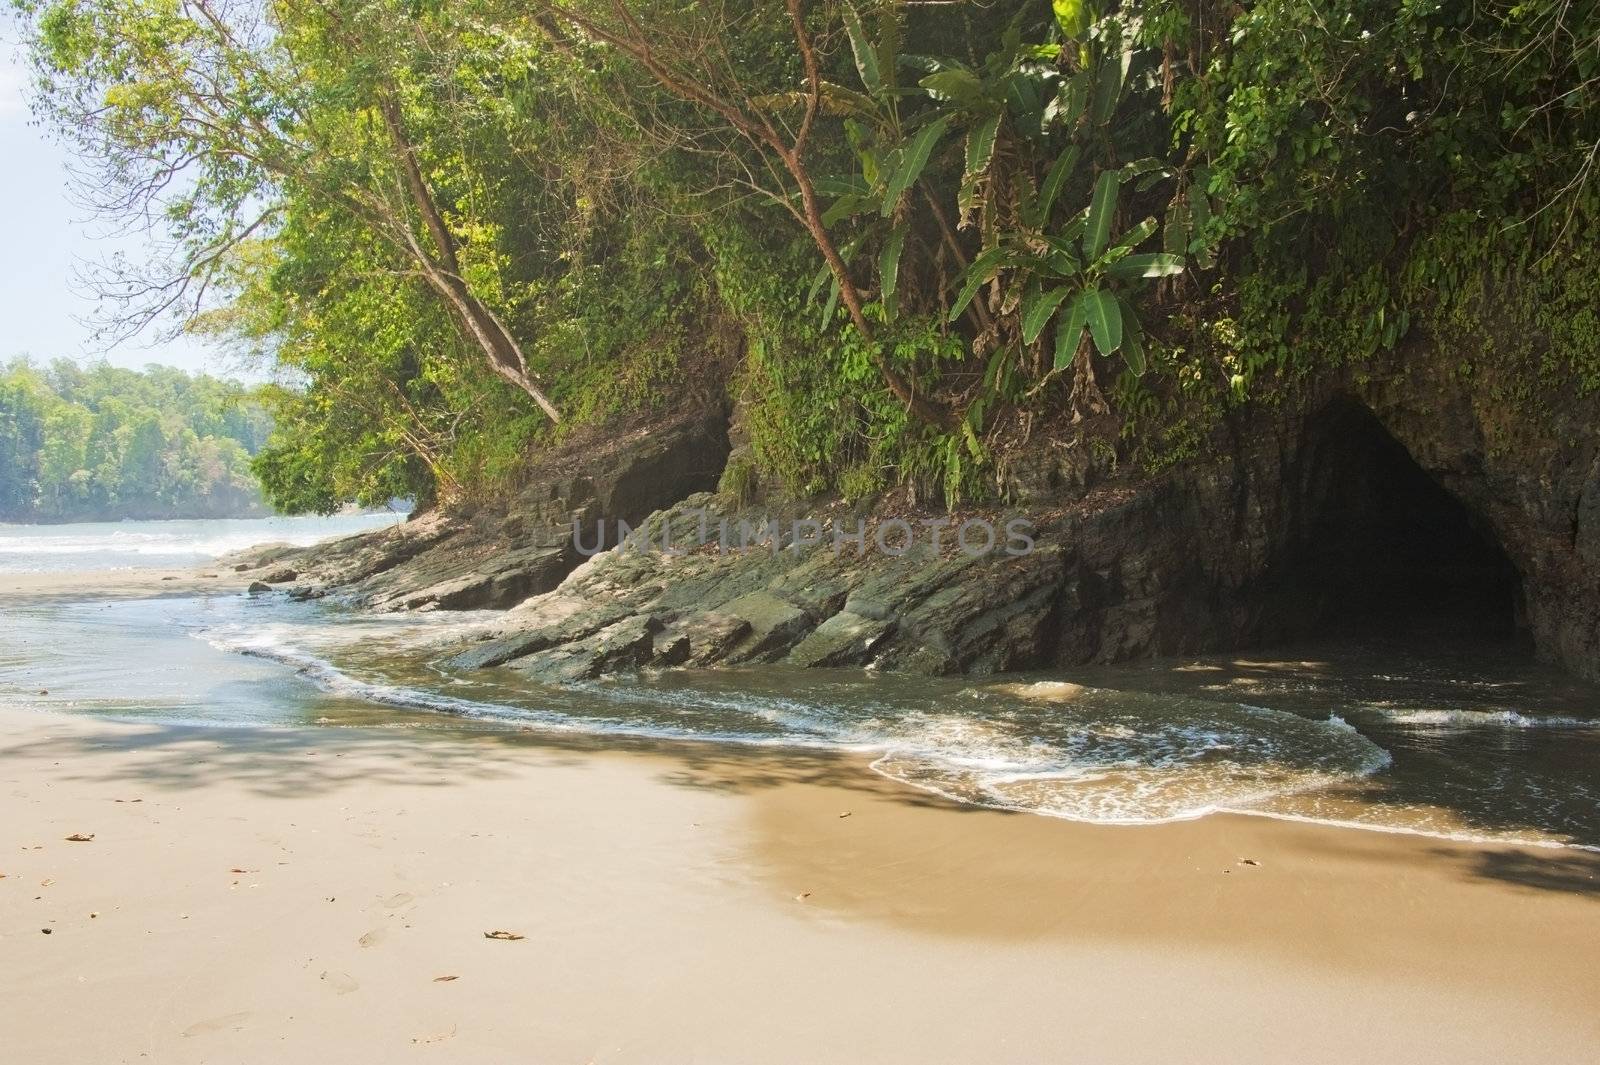 Interesting caves created by wave action at Playa Ventenas Costa Rica.